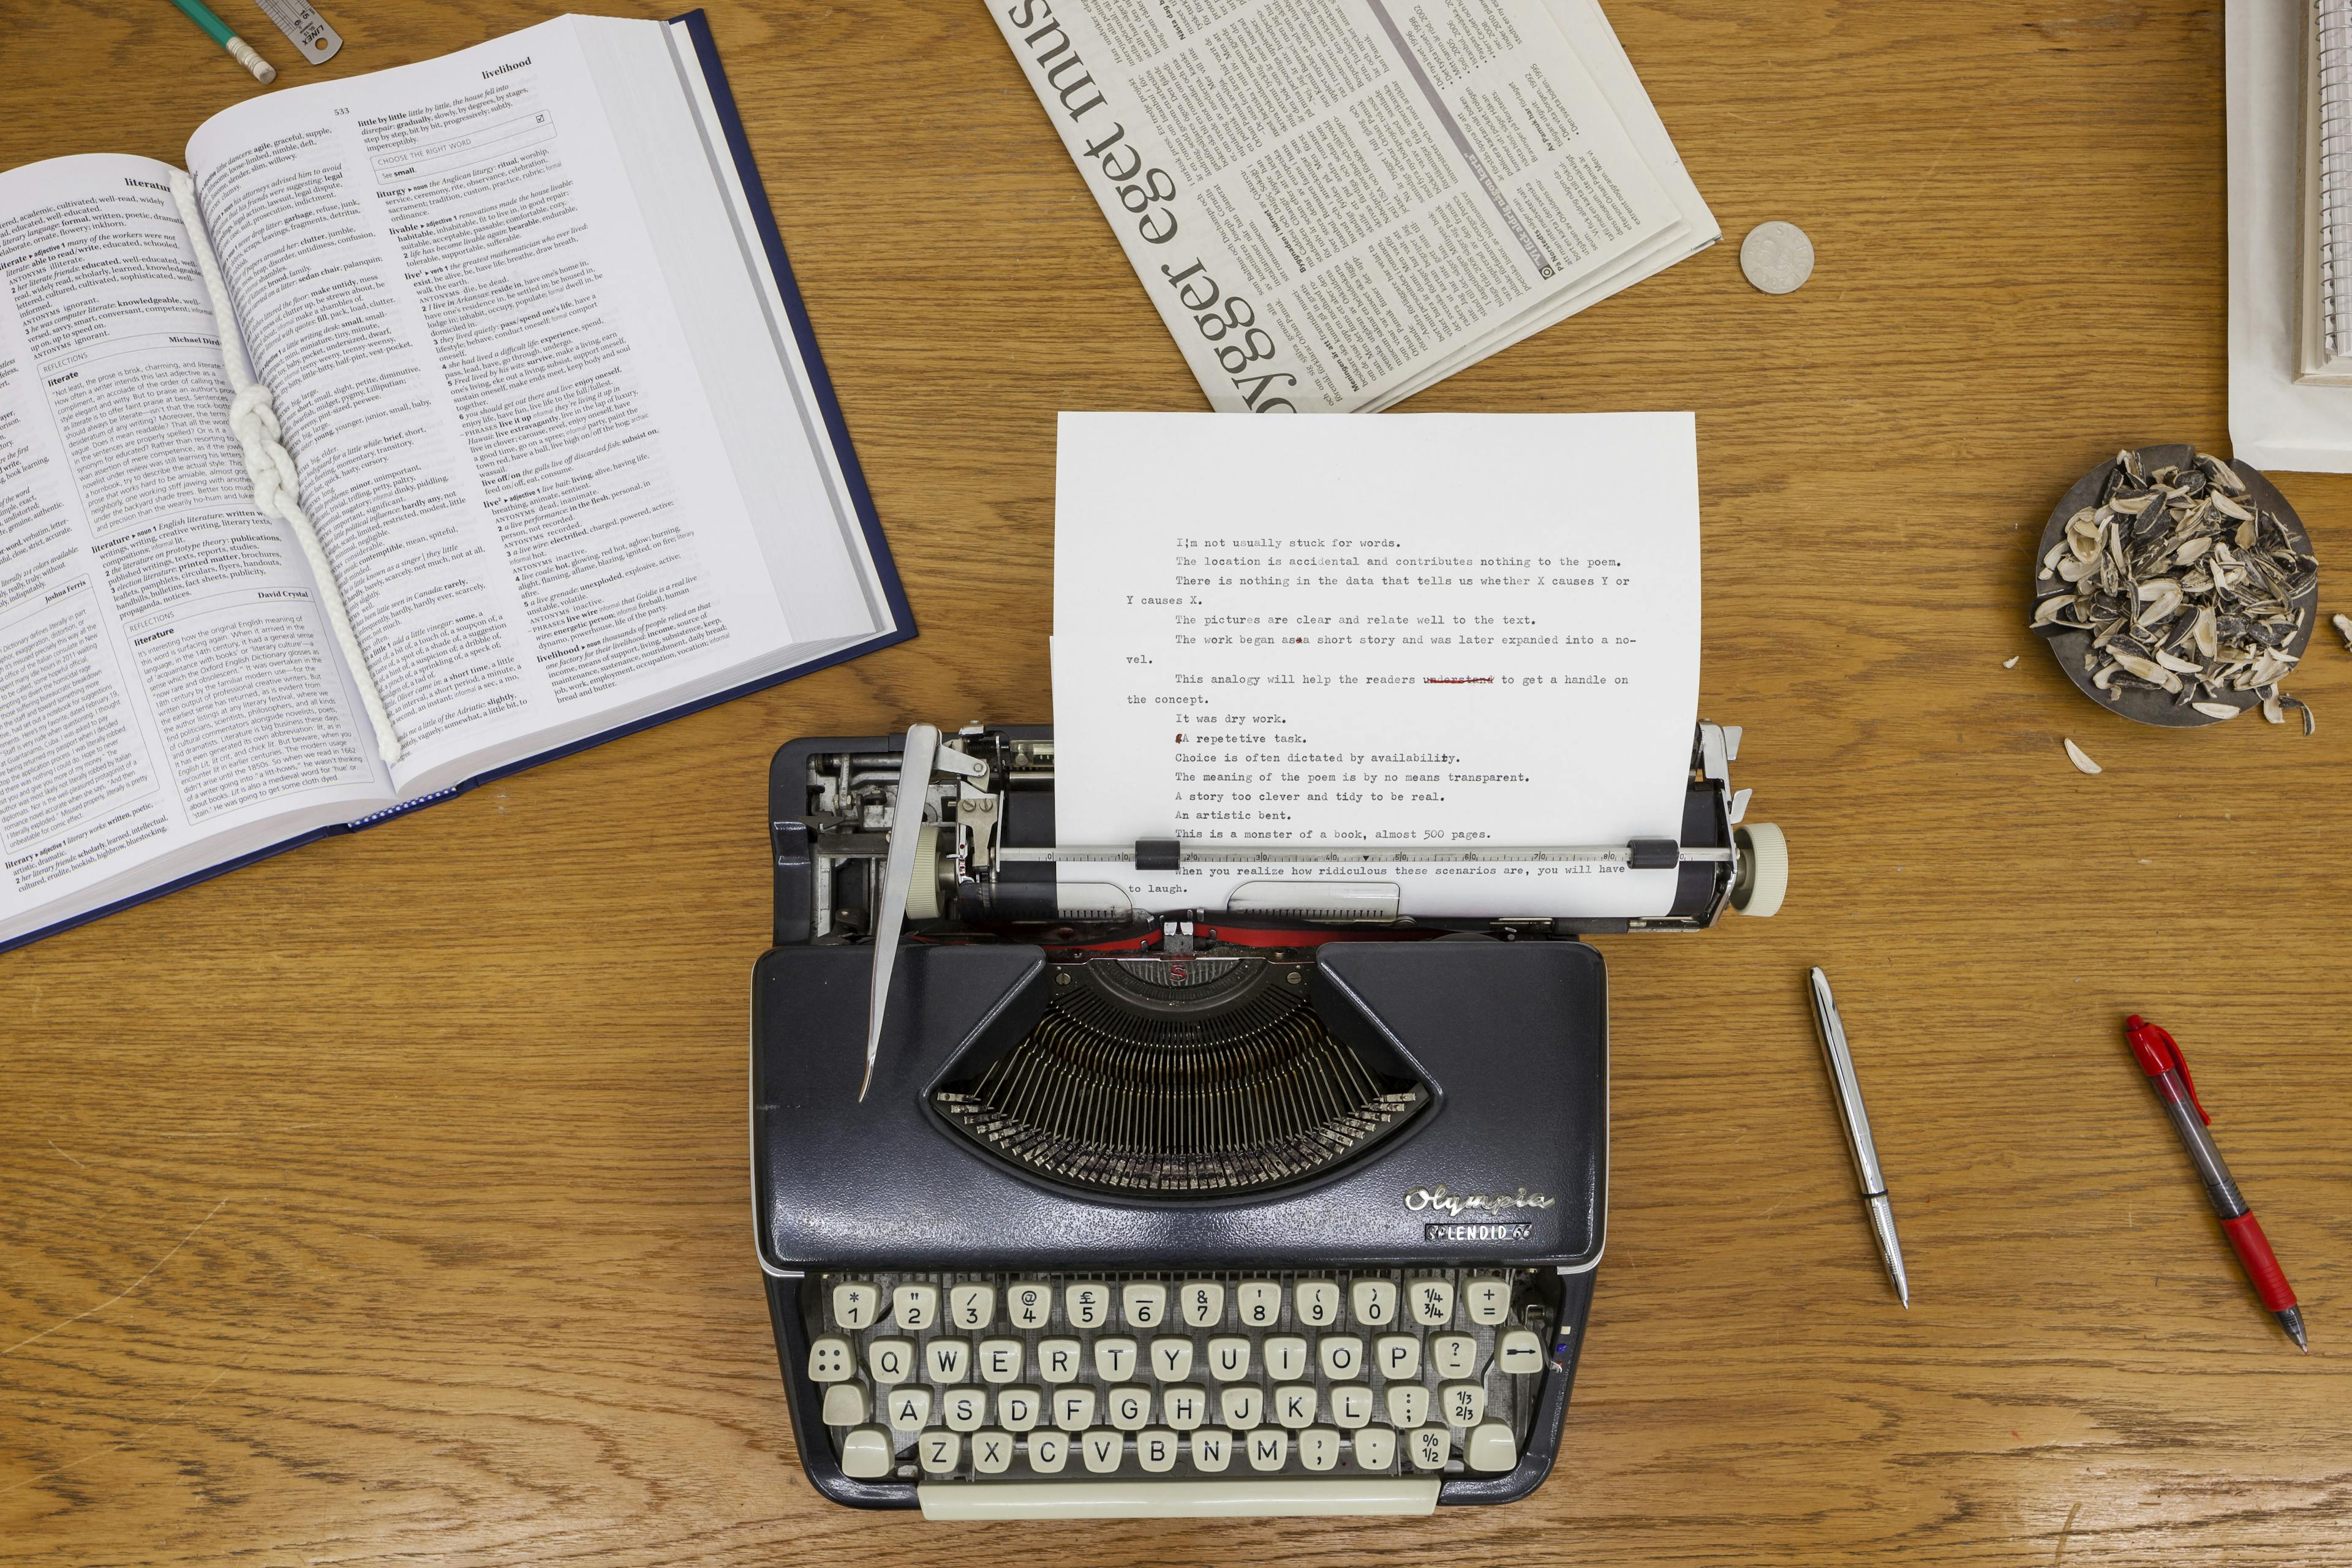 An overhead view of a black typewriter on a wooden desk surrounded by open books, papers, pens and a bowl of sunflower seed shells.